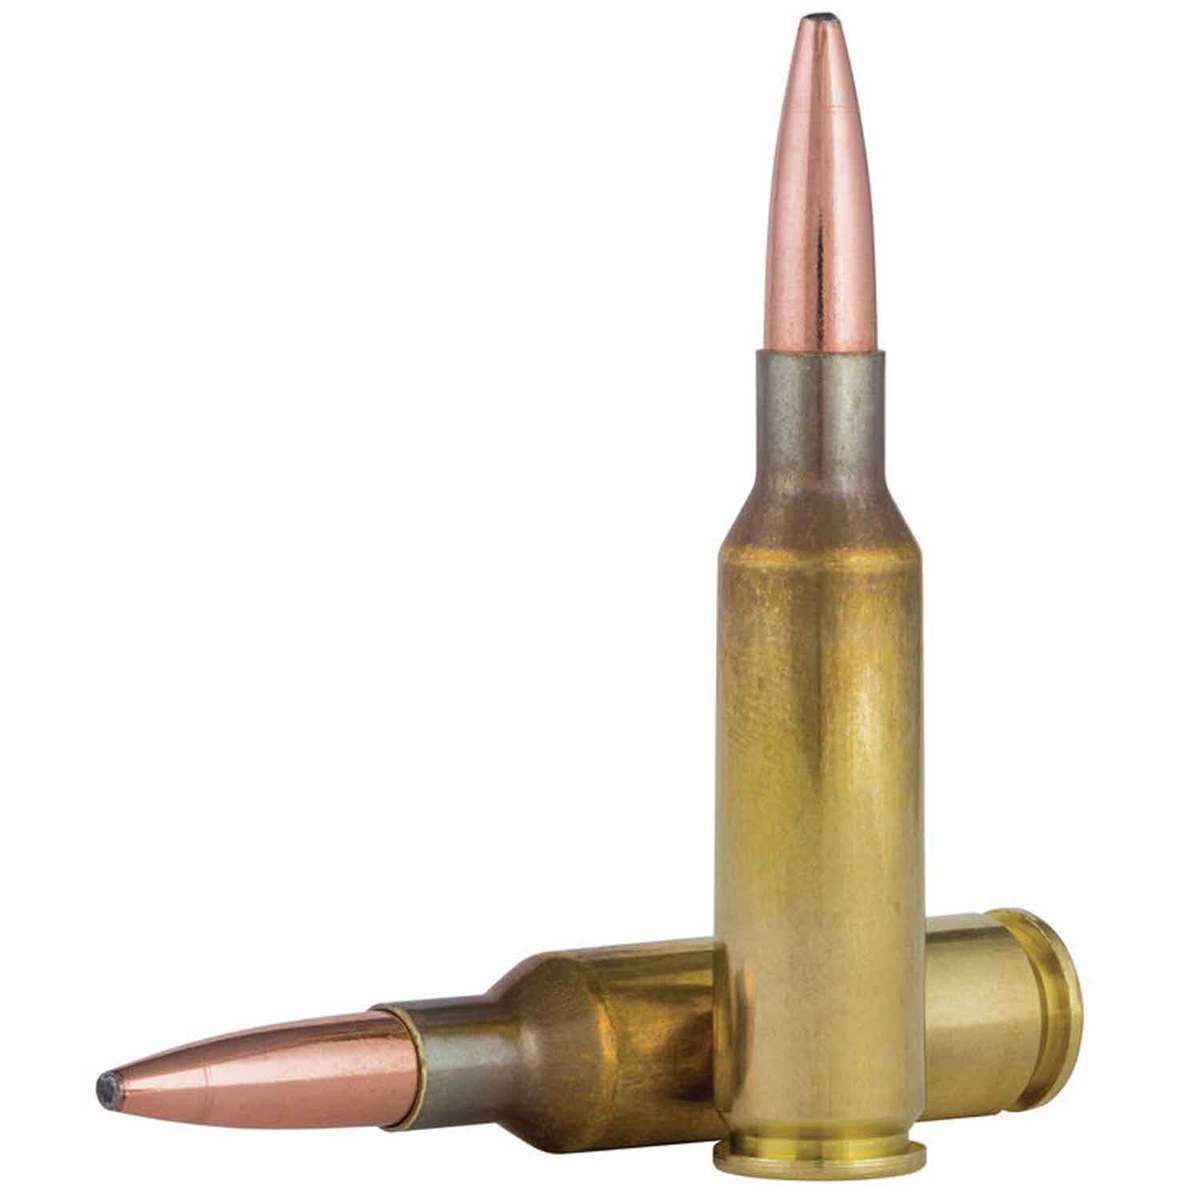 Federal Ammo Mail In Rebate 224 Valkyrie